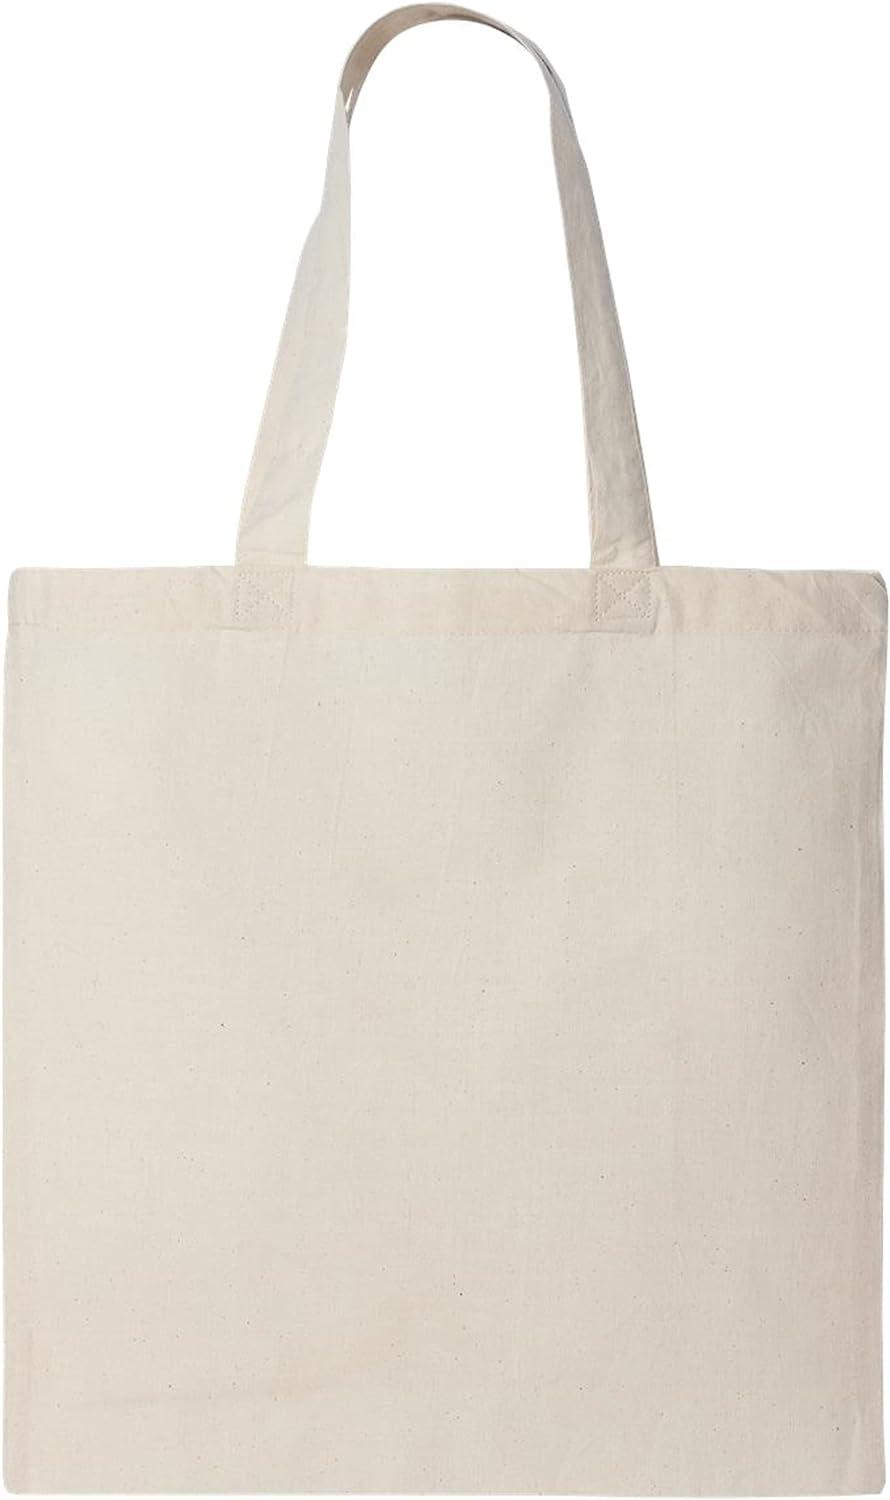 12 Pack Heavy Duty Blank Canvas Tote Bags, 100% Cotton Canvas Tote Bags